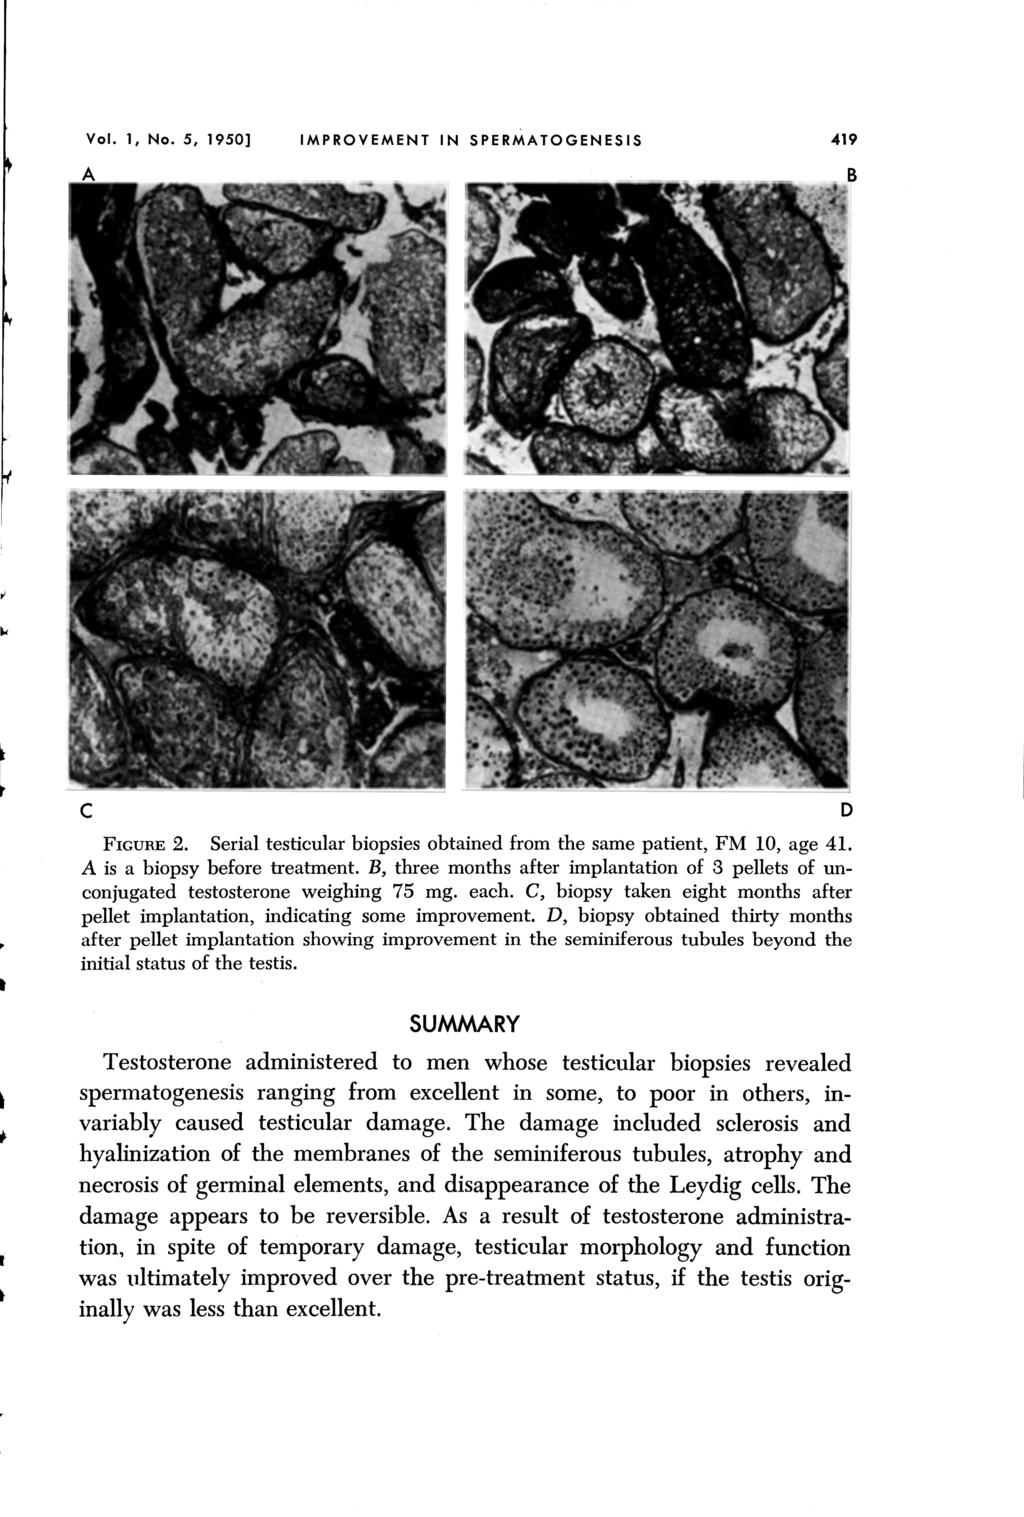 Vol. I, No. 5, 1950] IMPROVEMENT IN SPERMATOGENESIS c 419 D FIGURE 2. Serial testicular biopsies obtained from the same patient, FM 10, age 41. A is a biopsy before treatment.